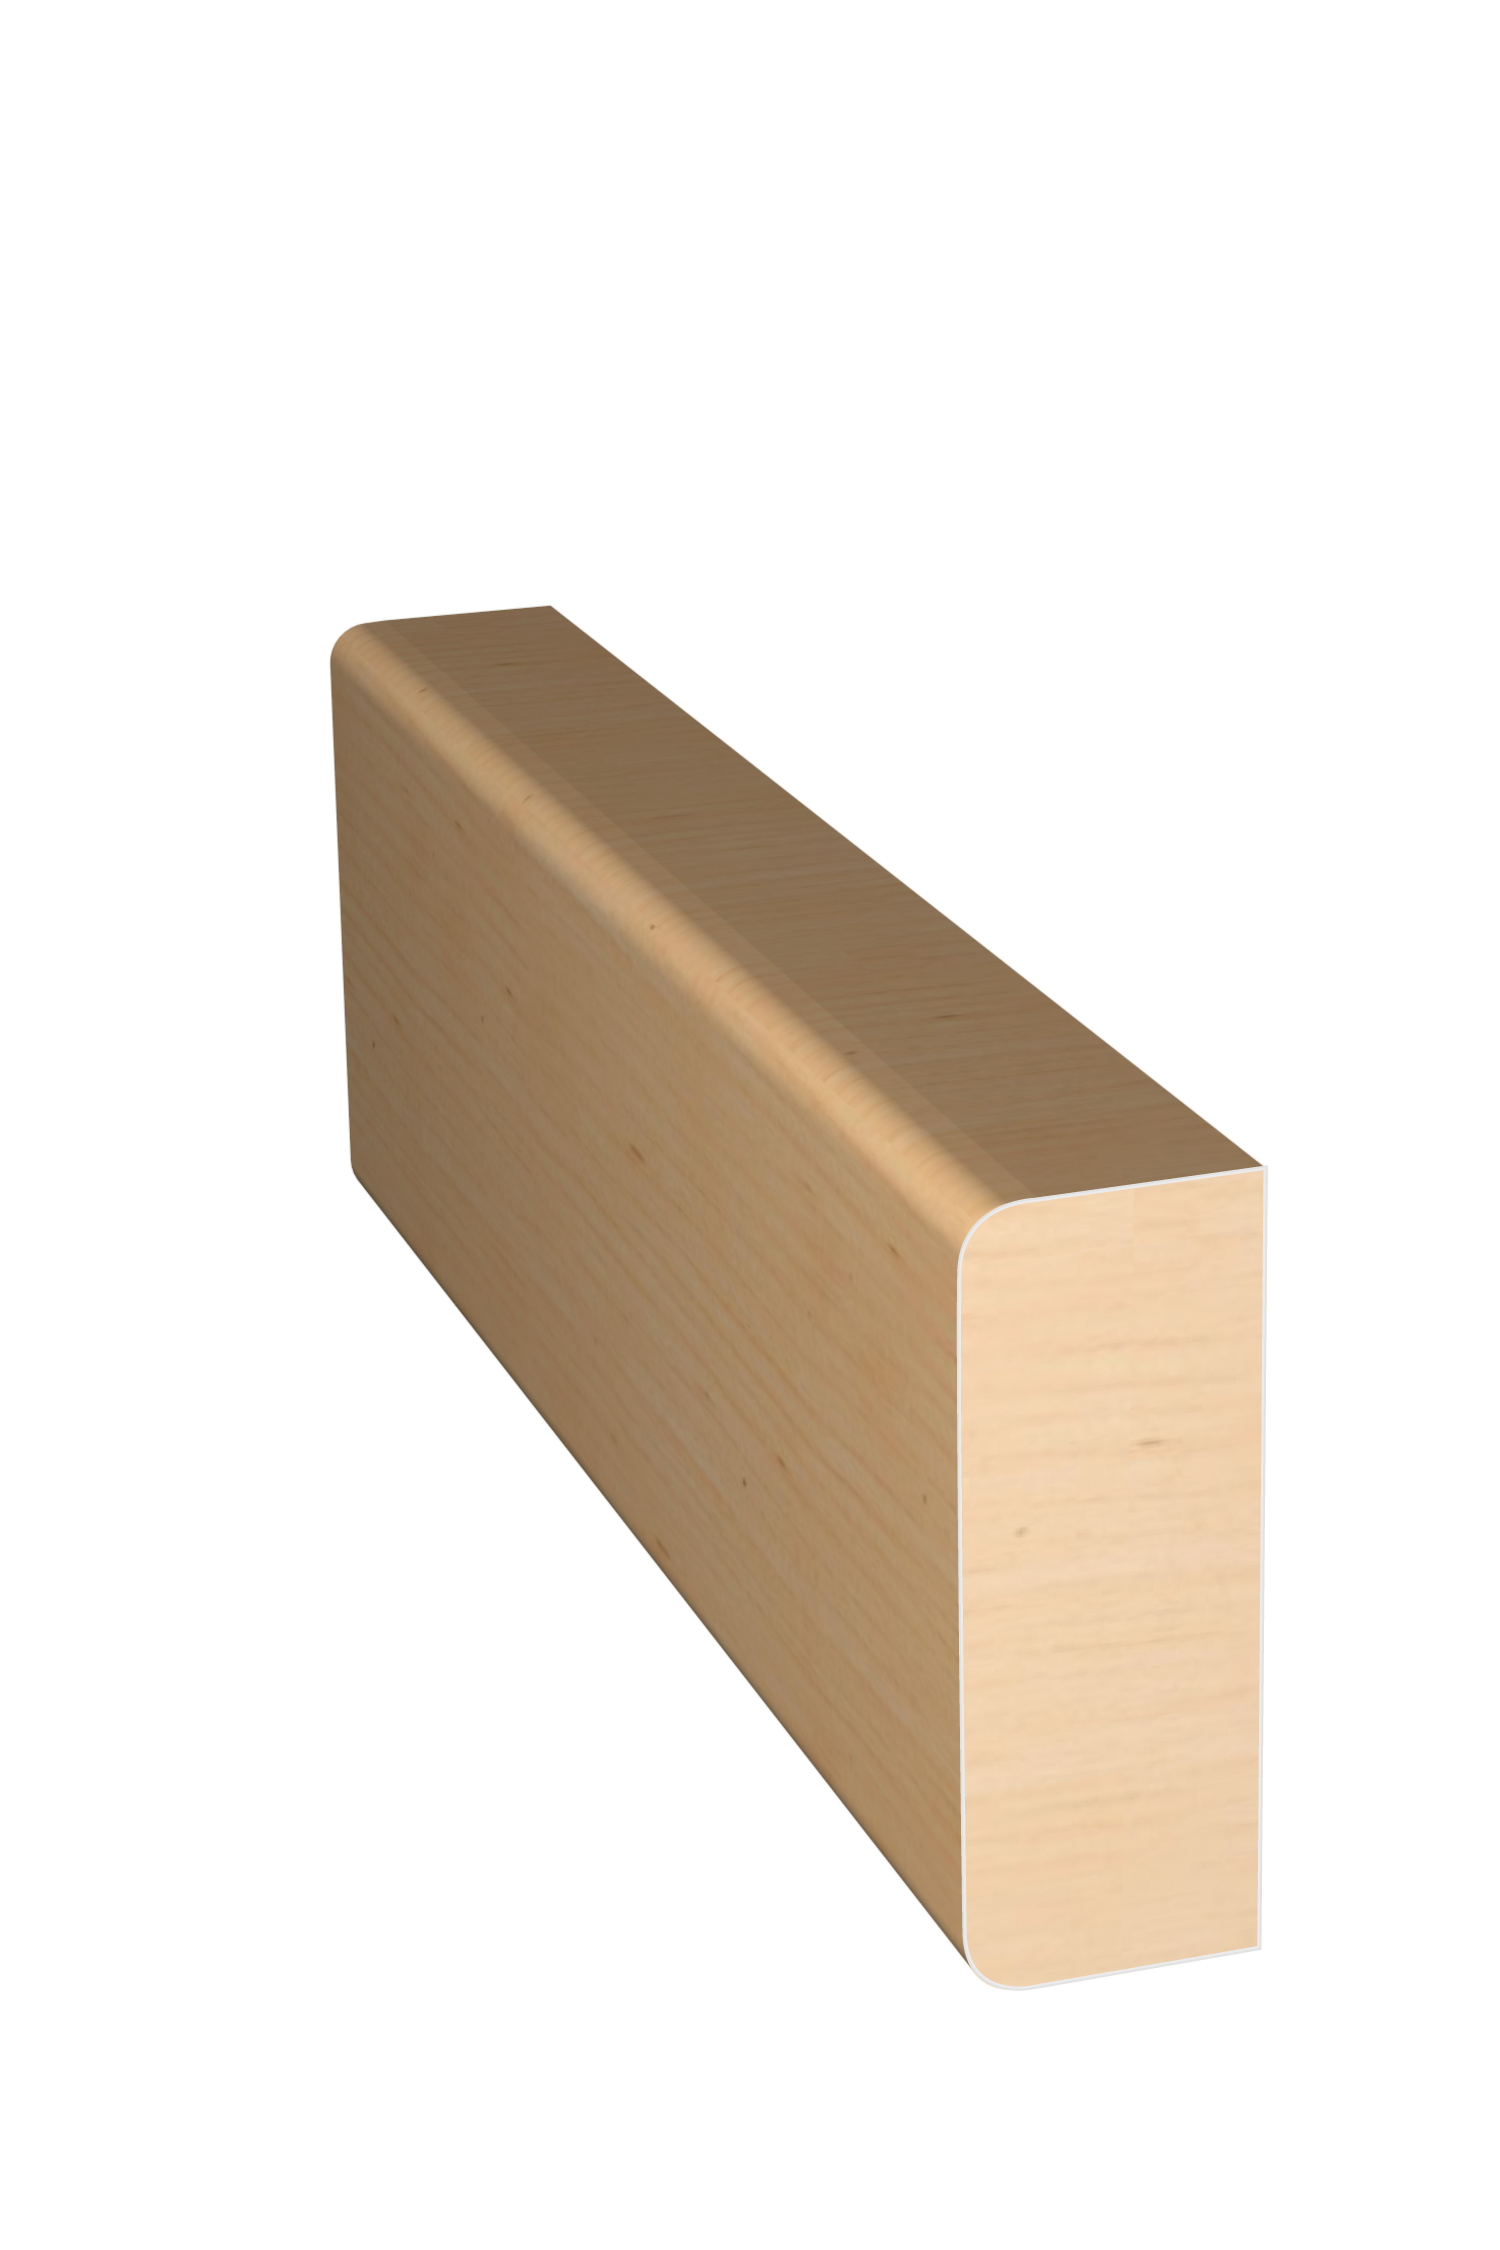 Three dimensional rendering of custom casing wood molding CAPL21 made by Public Lumber Company in Detroit.